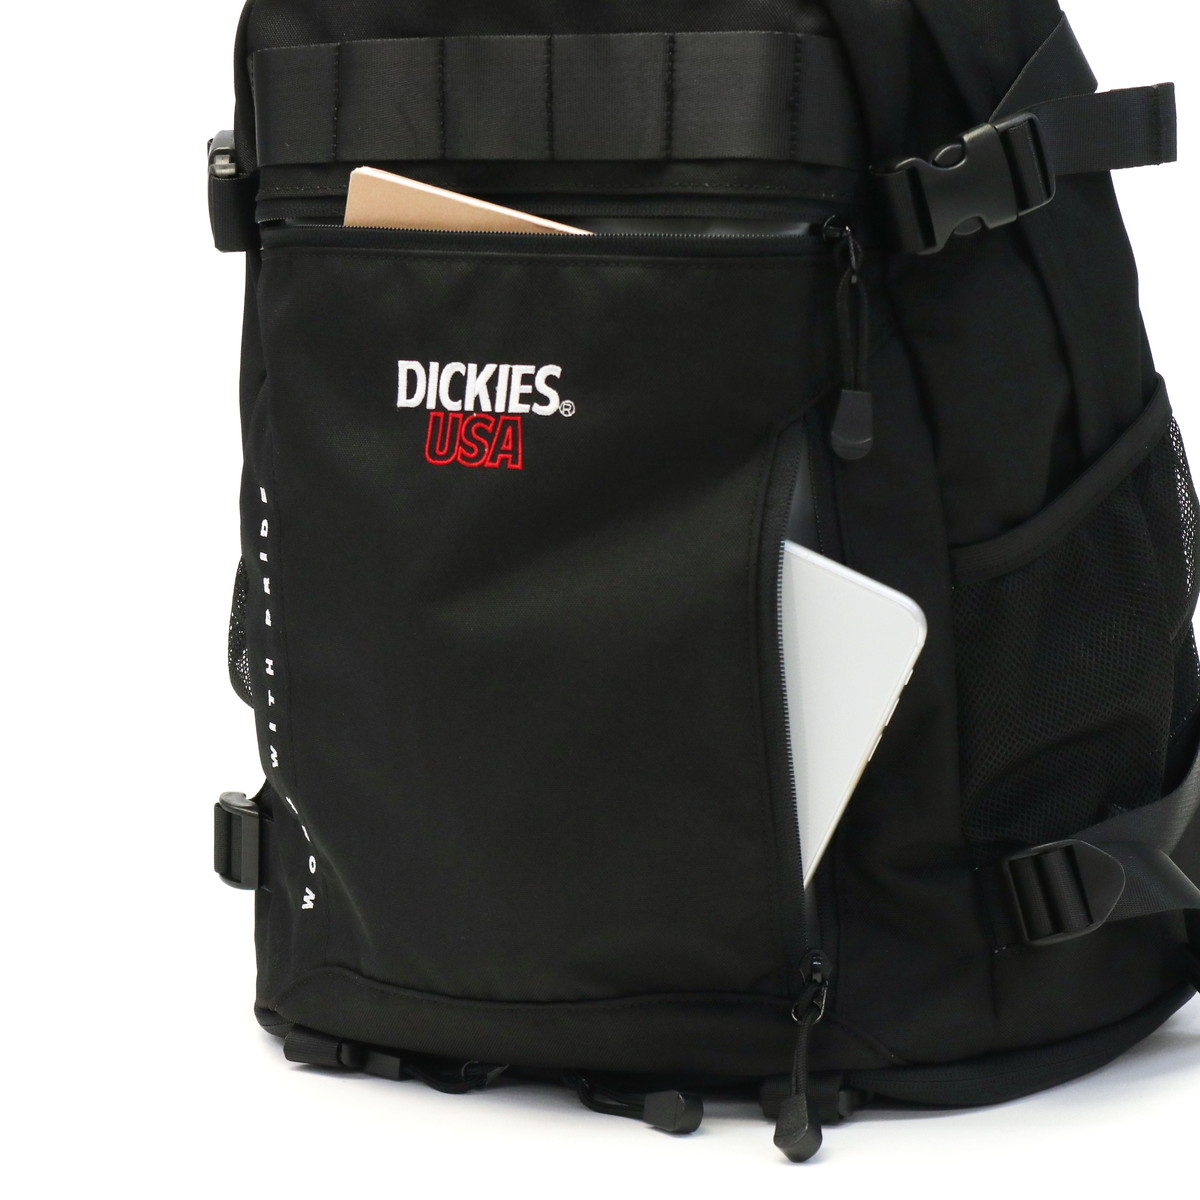 Dickies ディッキーズ USA EMB BACKPACK リュックサック 14738500 